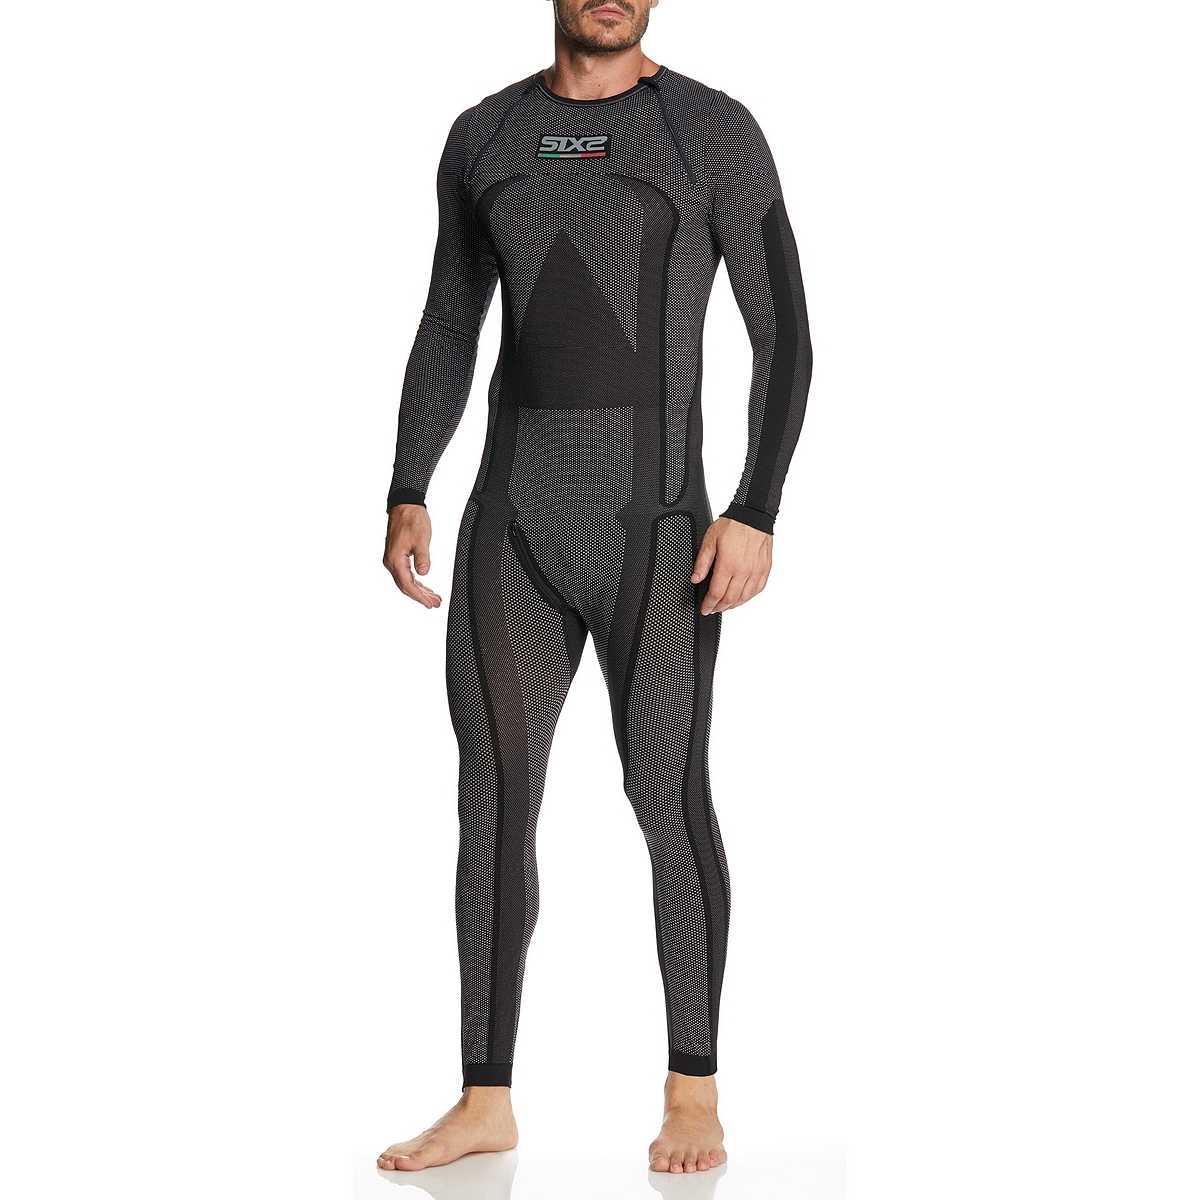 https://data.outletmoto.eu/imgprodotto/undersuit-technical-entire-sleeved-sixs_114438_zoom.jpg